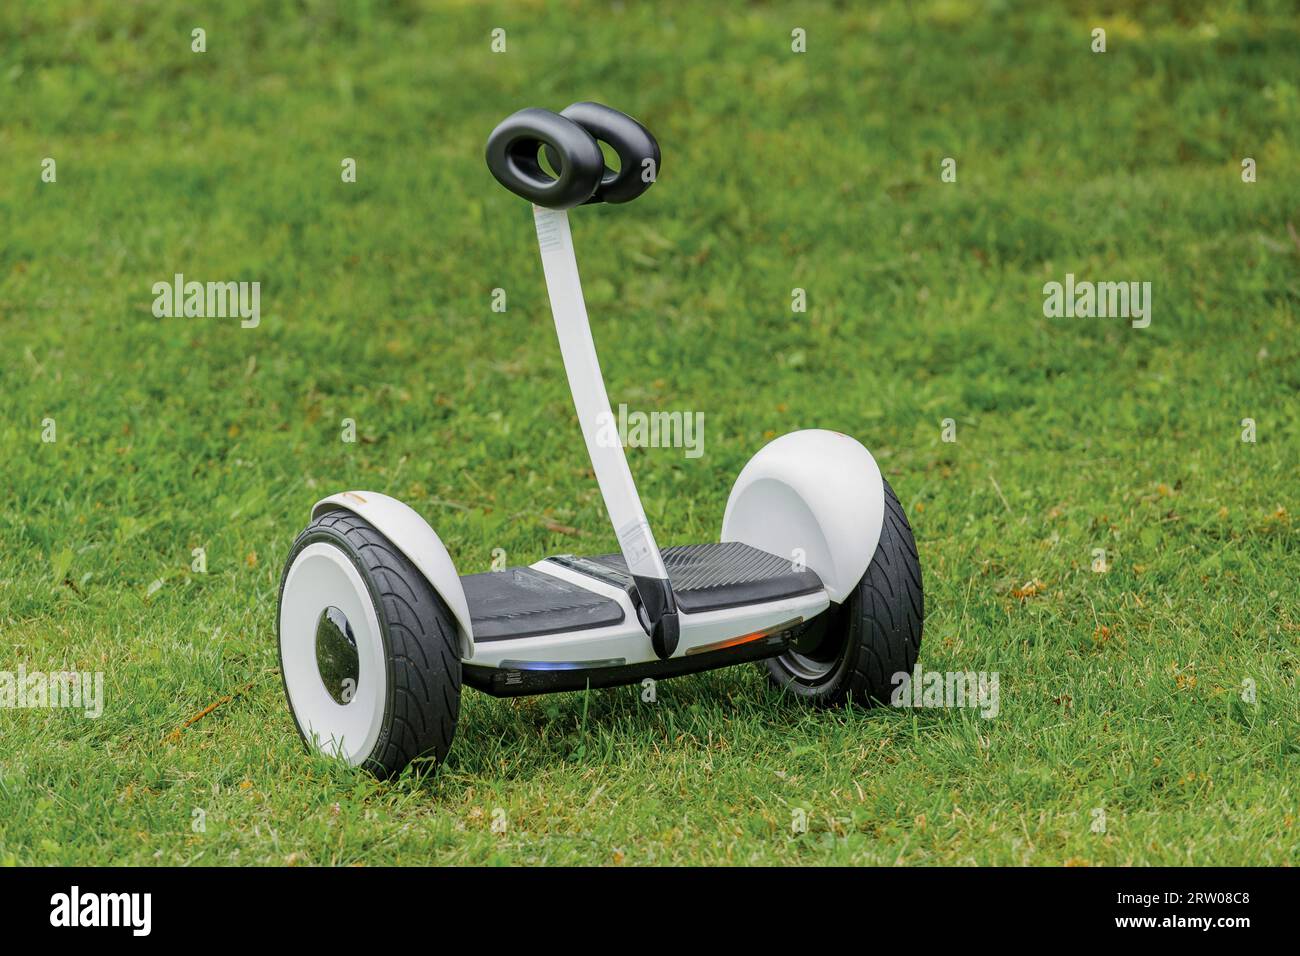 Hoverboard object is a street modern electric vehicle against the background of grass in the park. Stock Photo